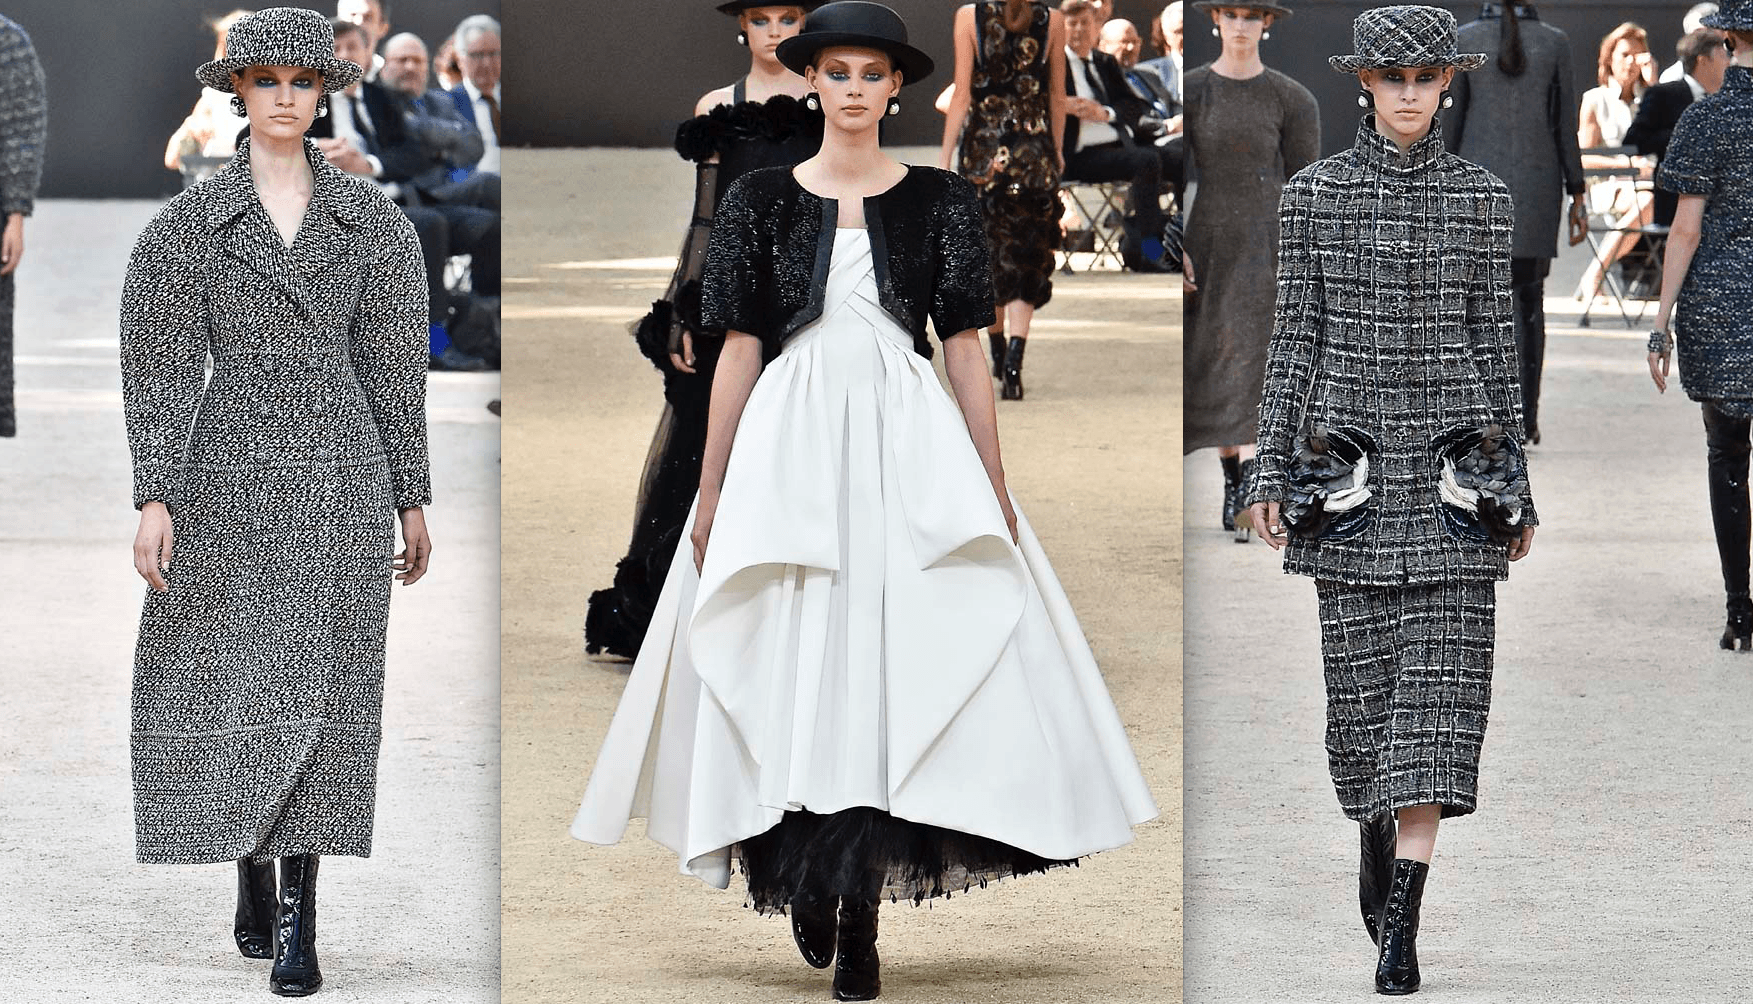 Zinloos Kardinaal pot Karl Lagerfeld's Homage to Paris at Haute Couture - Daily Front Row